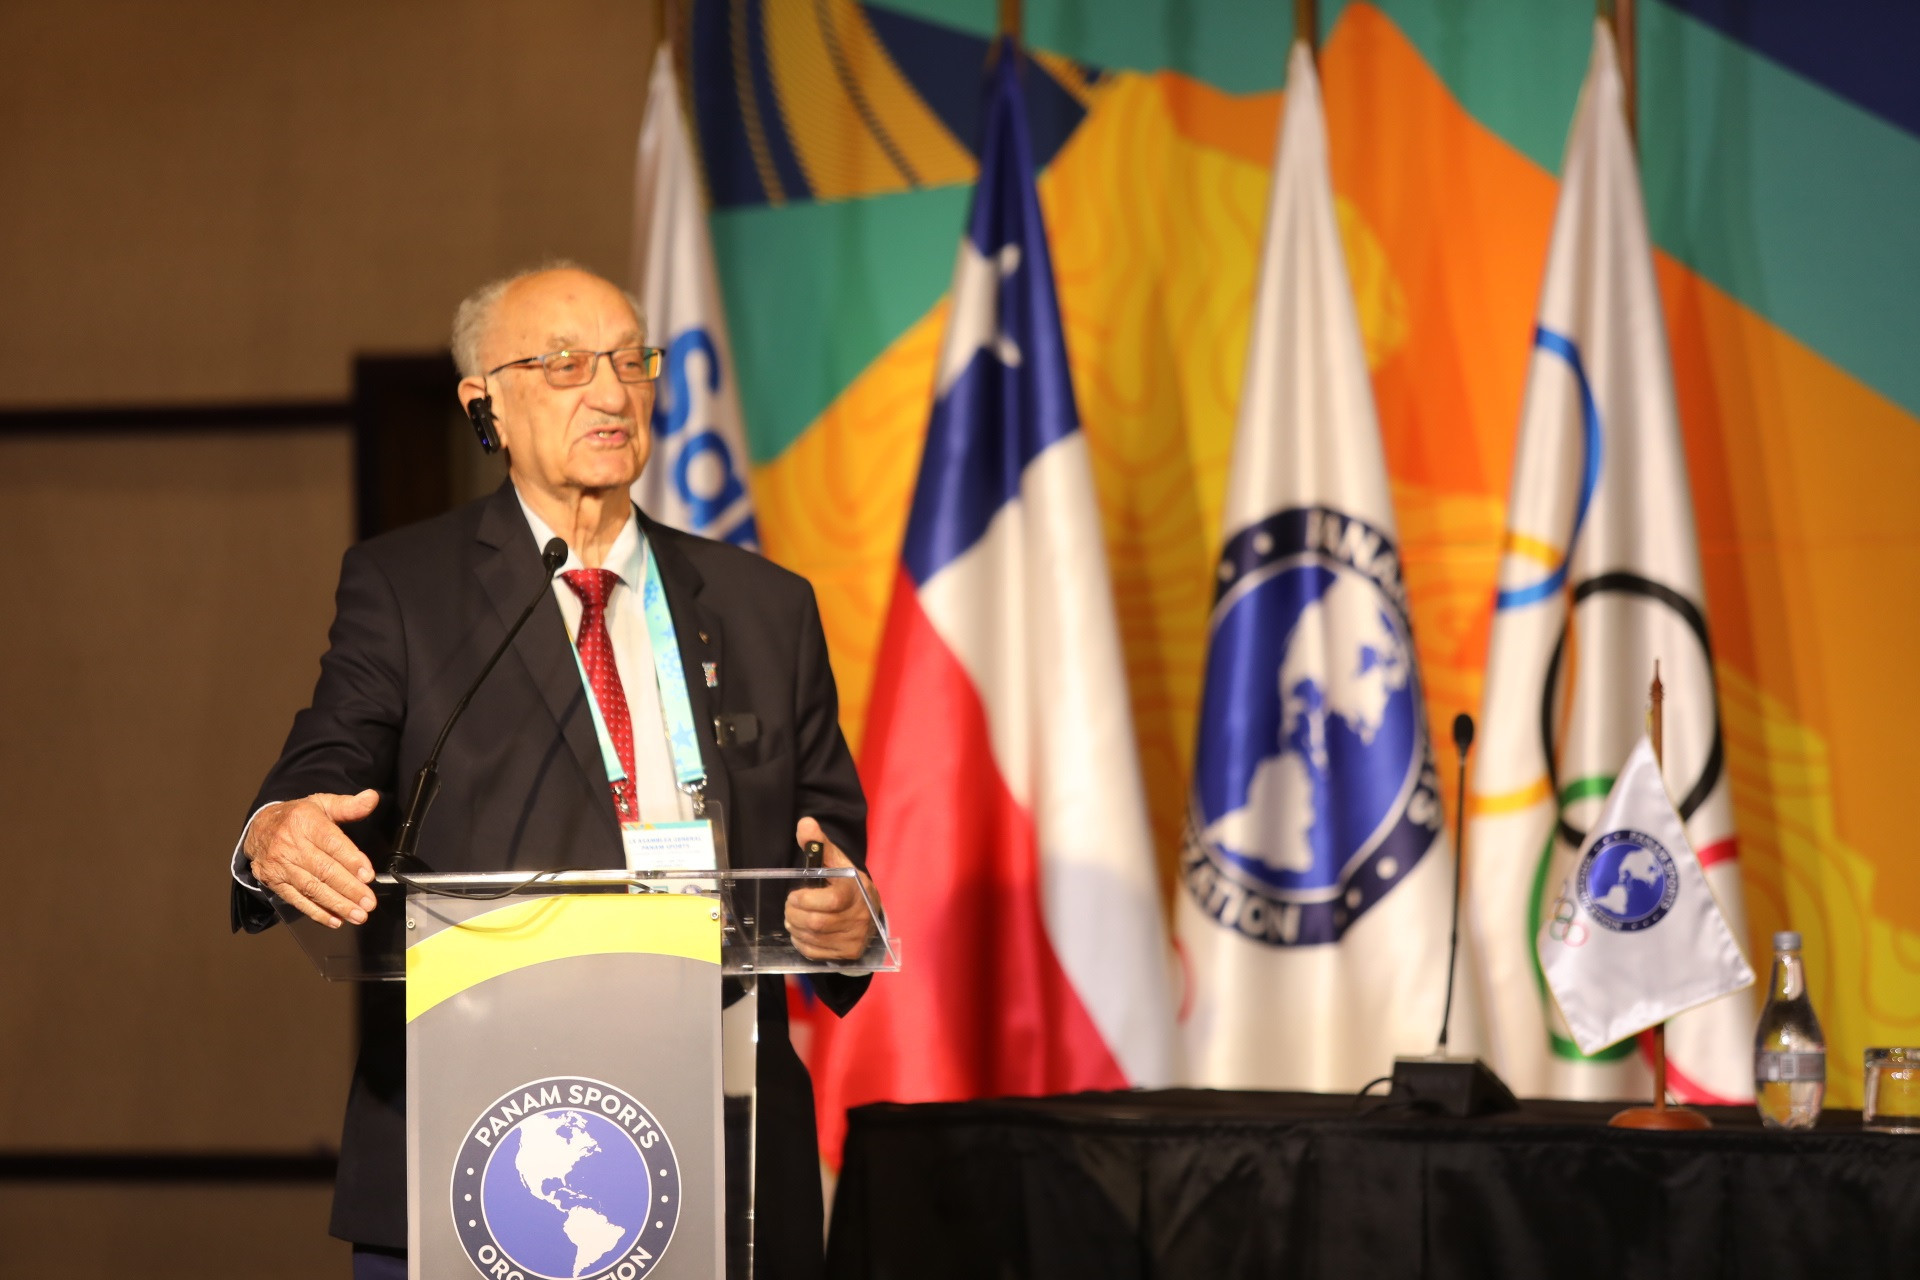 Michael Fennell, chair of the Panam Sports' Technical Commission for Santiago 2023, raised concerns over preparations for next year's Pan American Games ©Panam Sports (image via: insidethegames.biz)